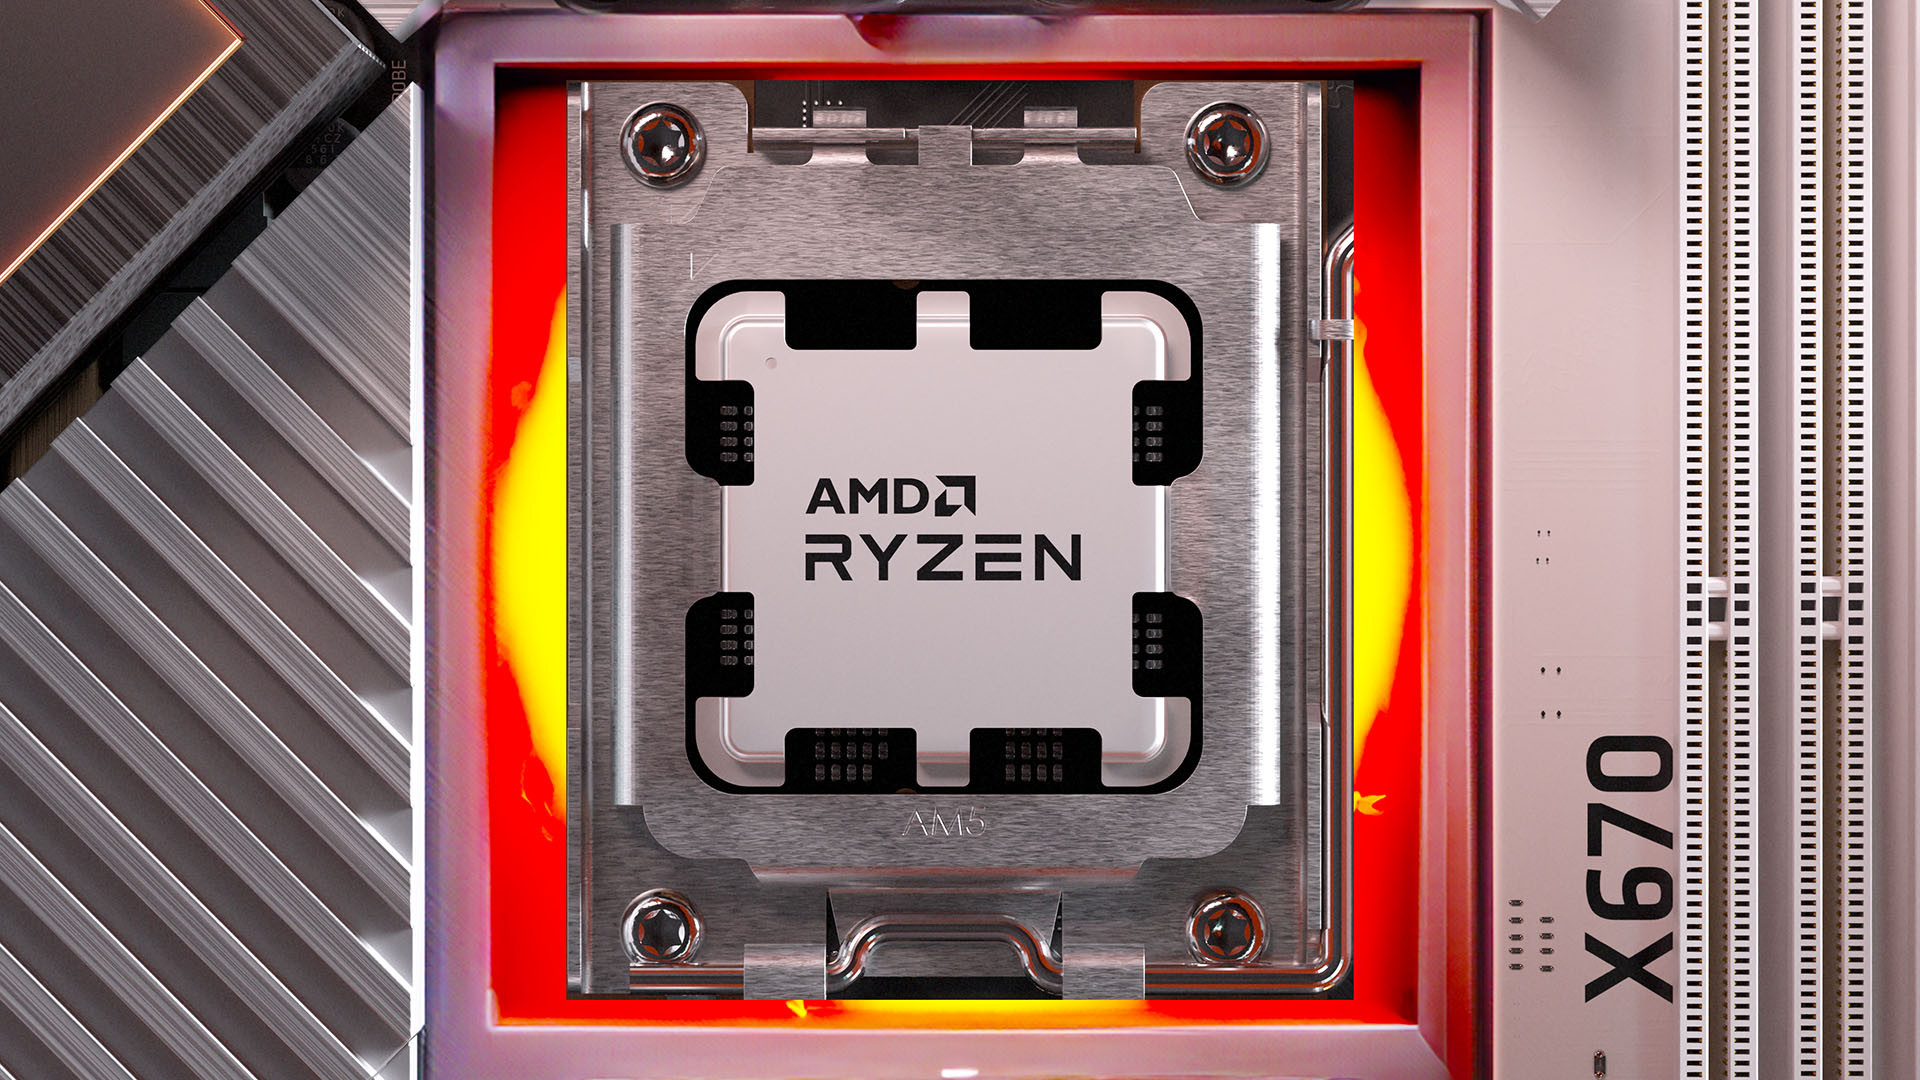 AMD's new Ryzen CPU should really worry Intel, if this leak is right